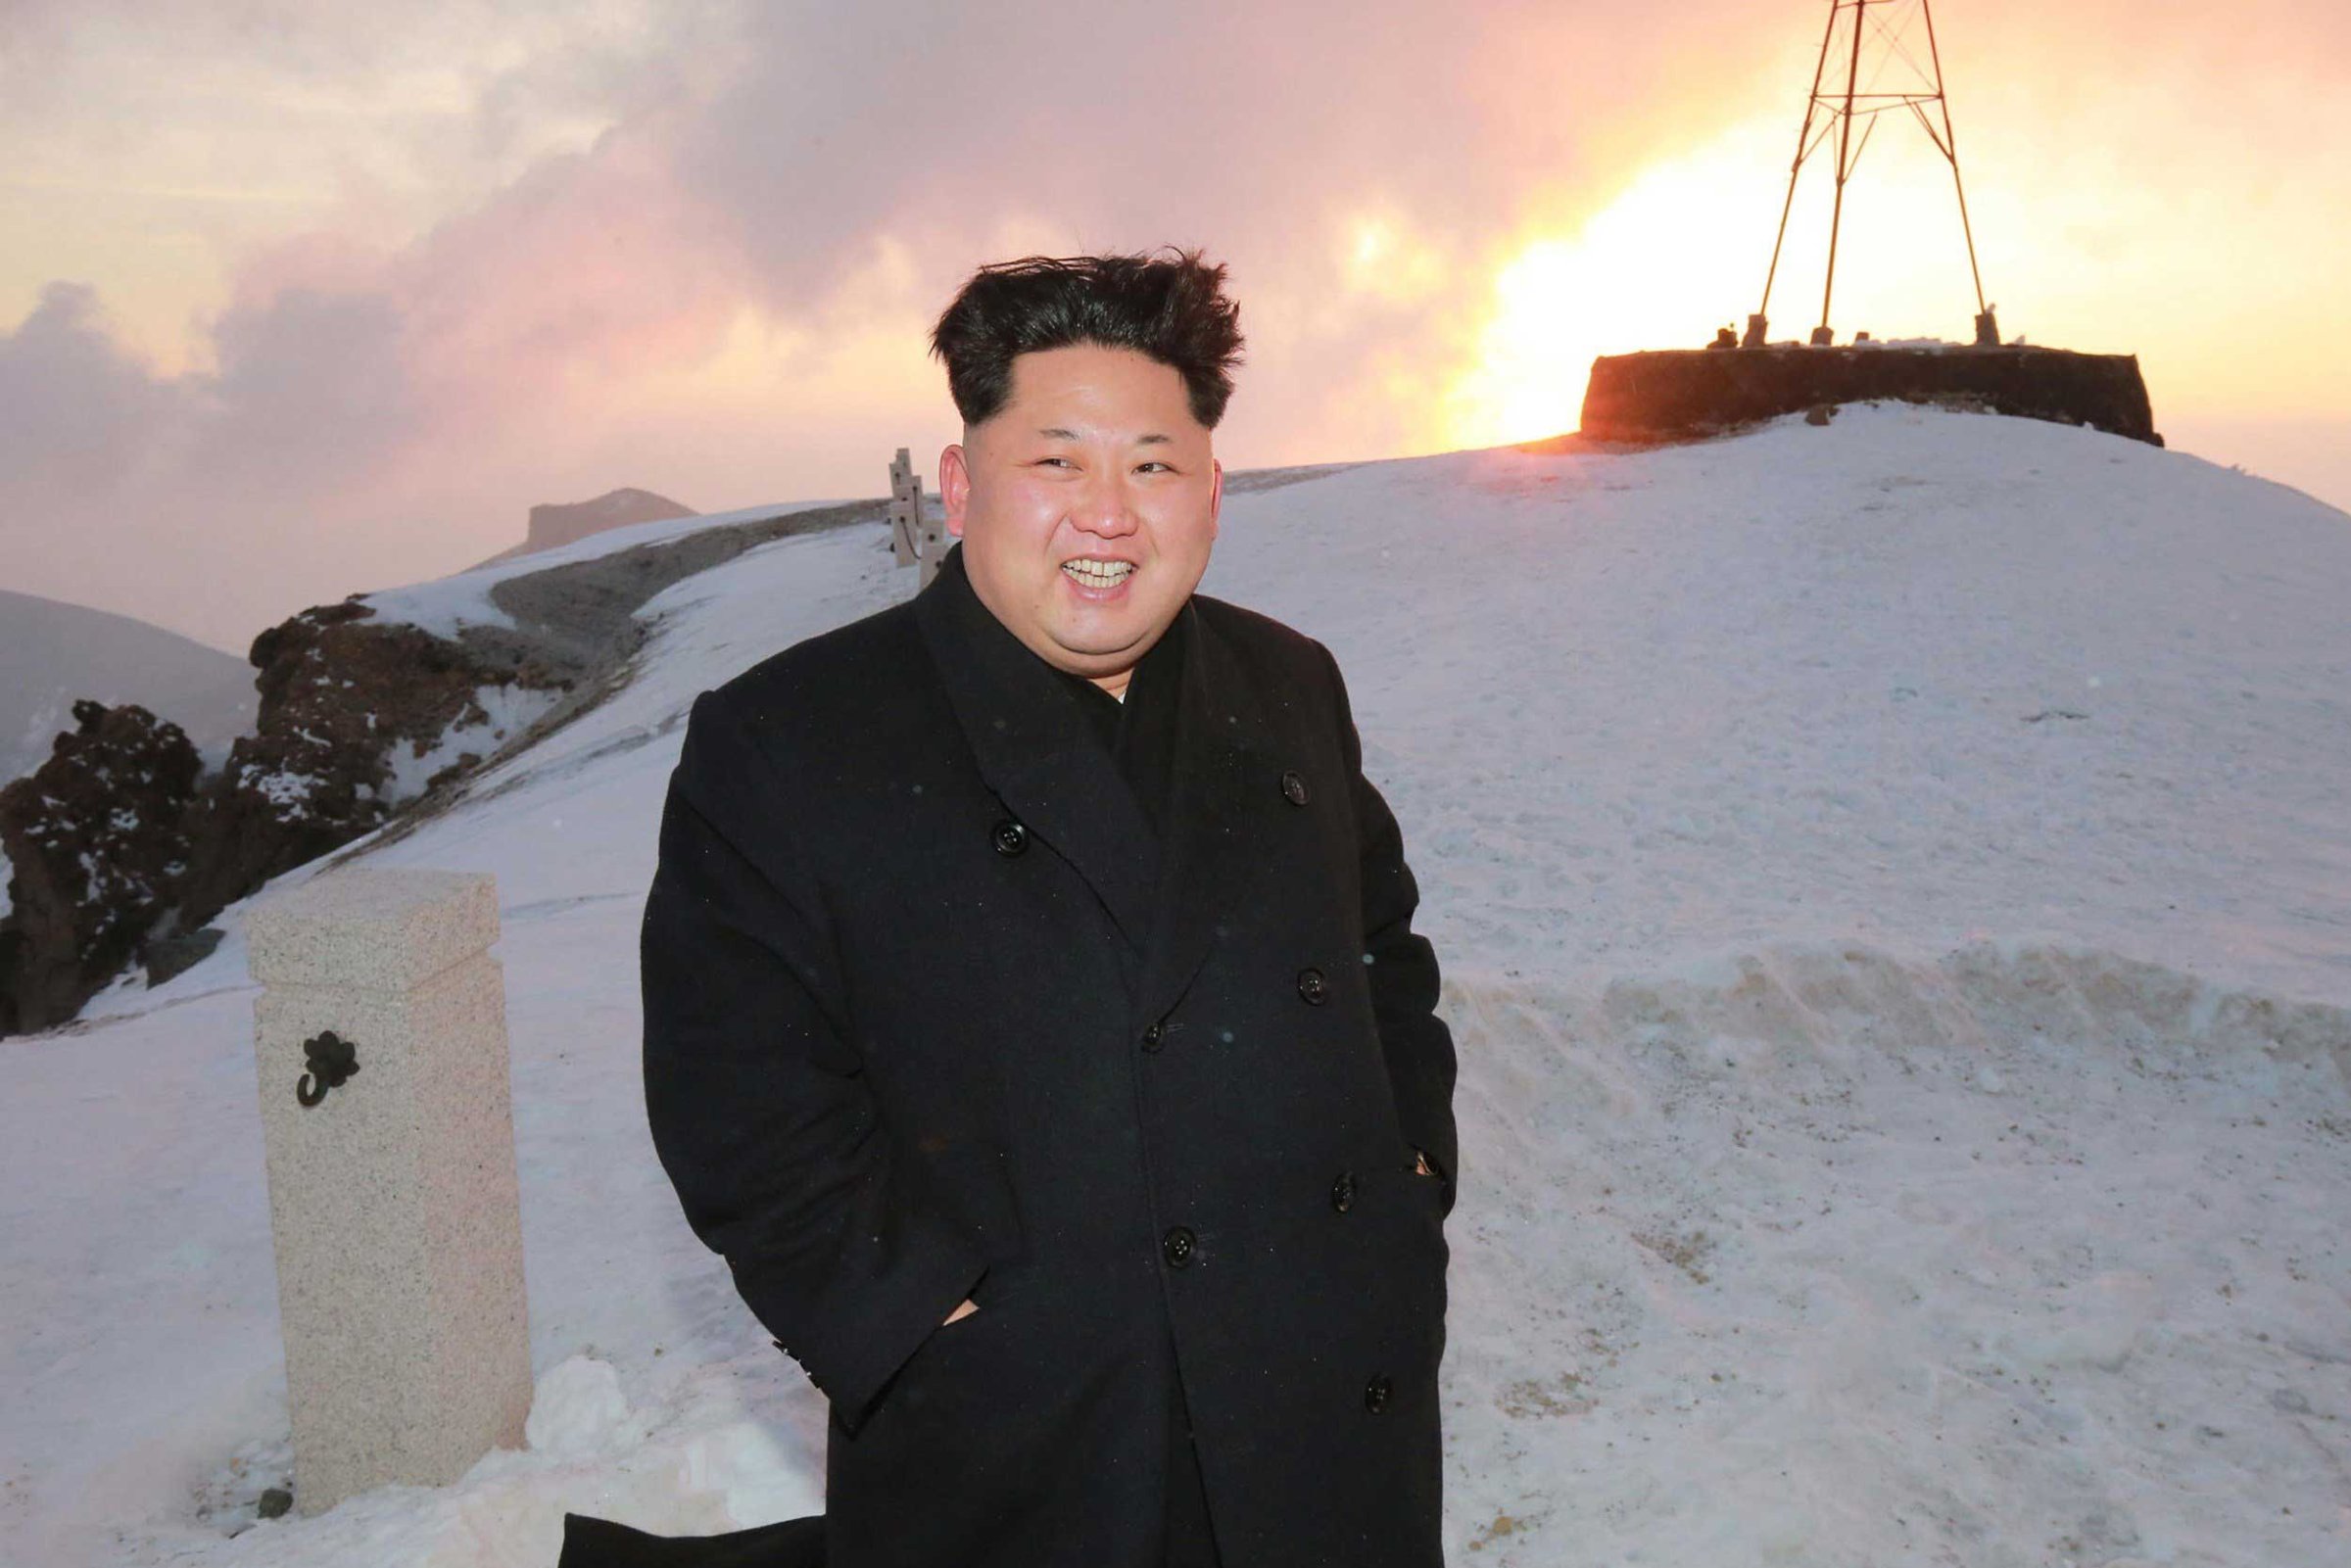 This photo taken on April 18, 2015 and released by North Korea's official Korean Central News Agency (KCNA) on April 20, 2015 shows North Korean leader Kim Jong-Un on a snow-covered Mount Paektu during sunrise in Ryanggang Province.